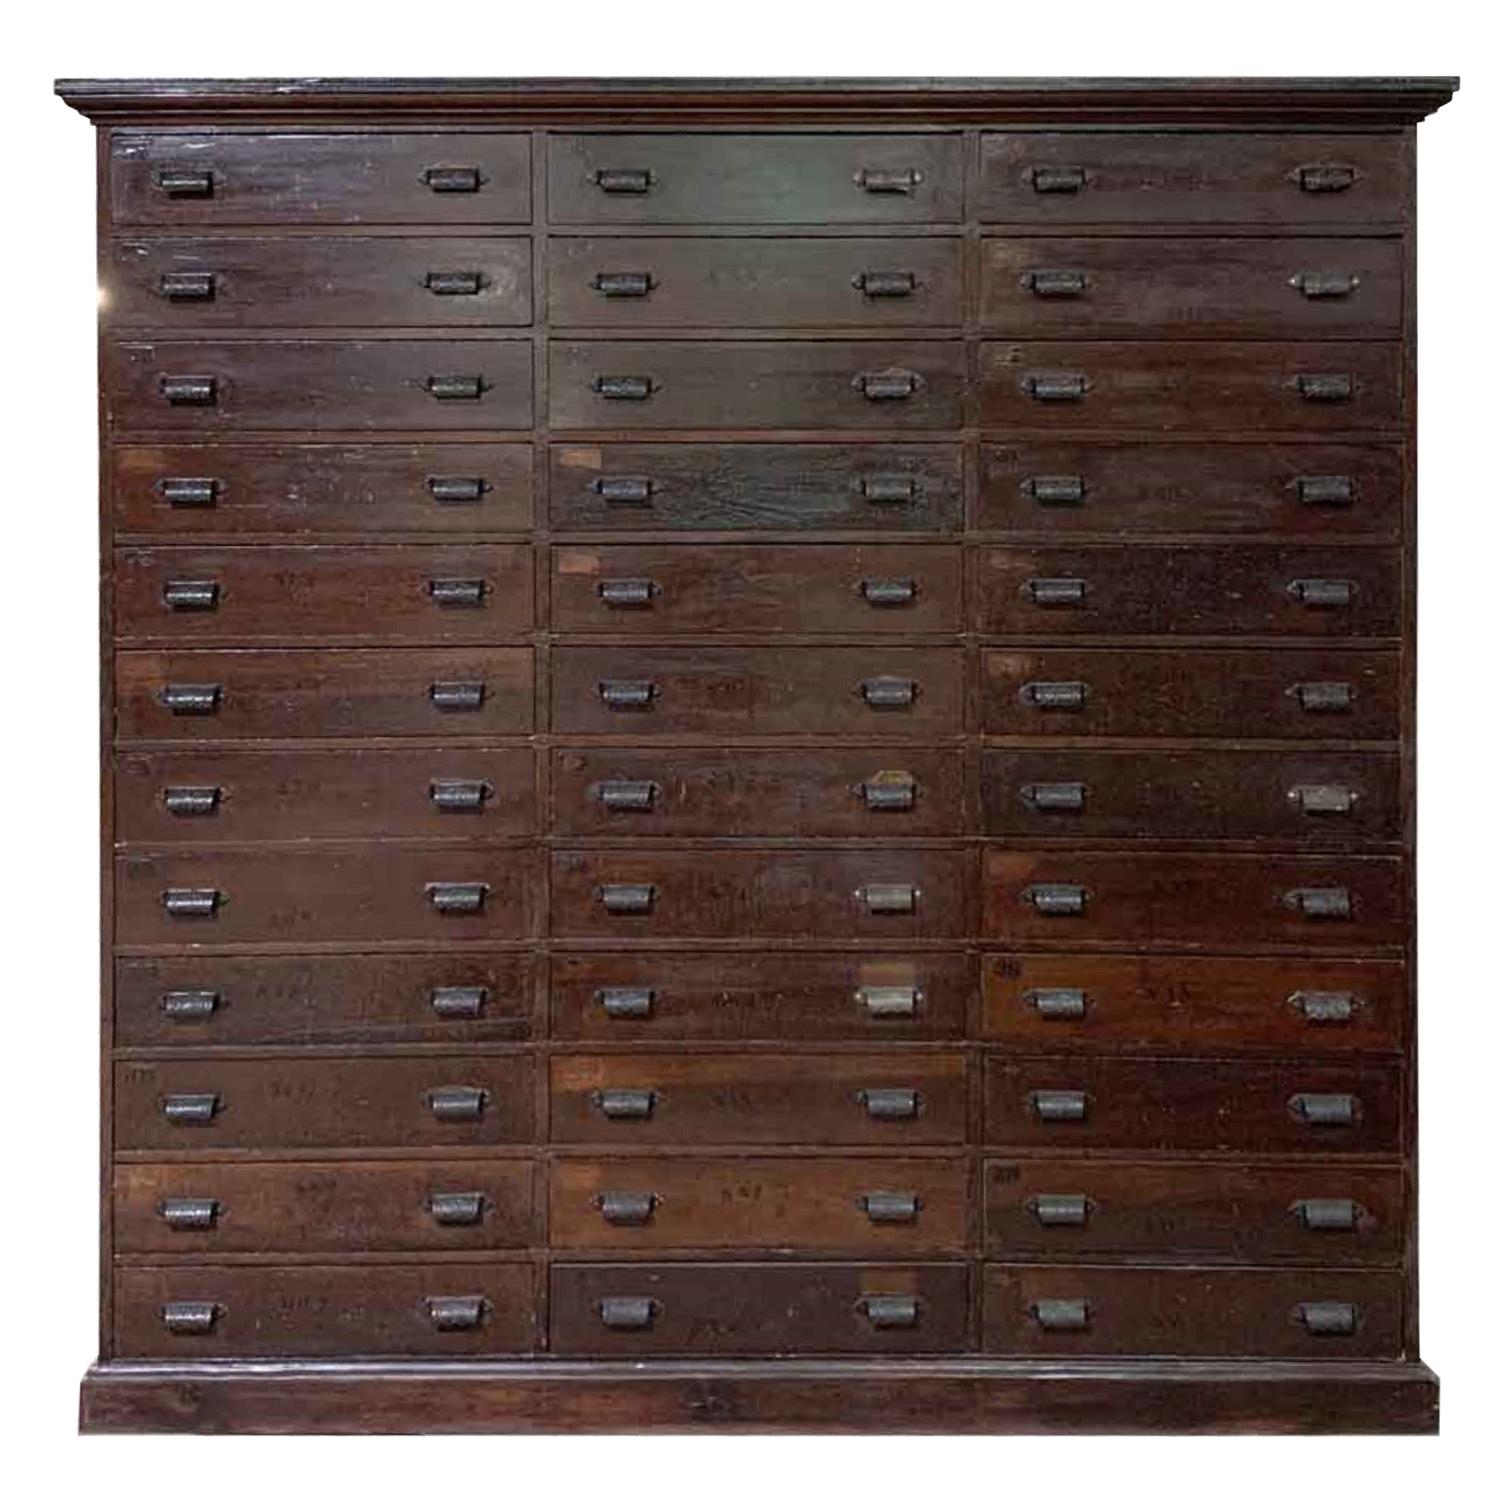 1880s New England Industrial Wood Cabinet 36 Drawers